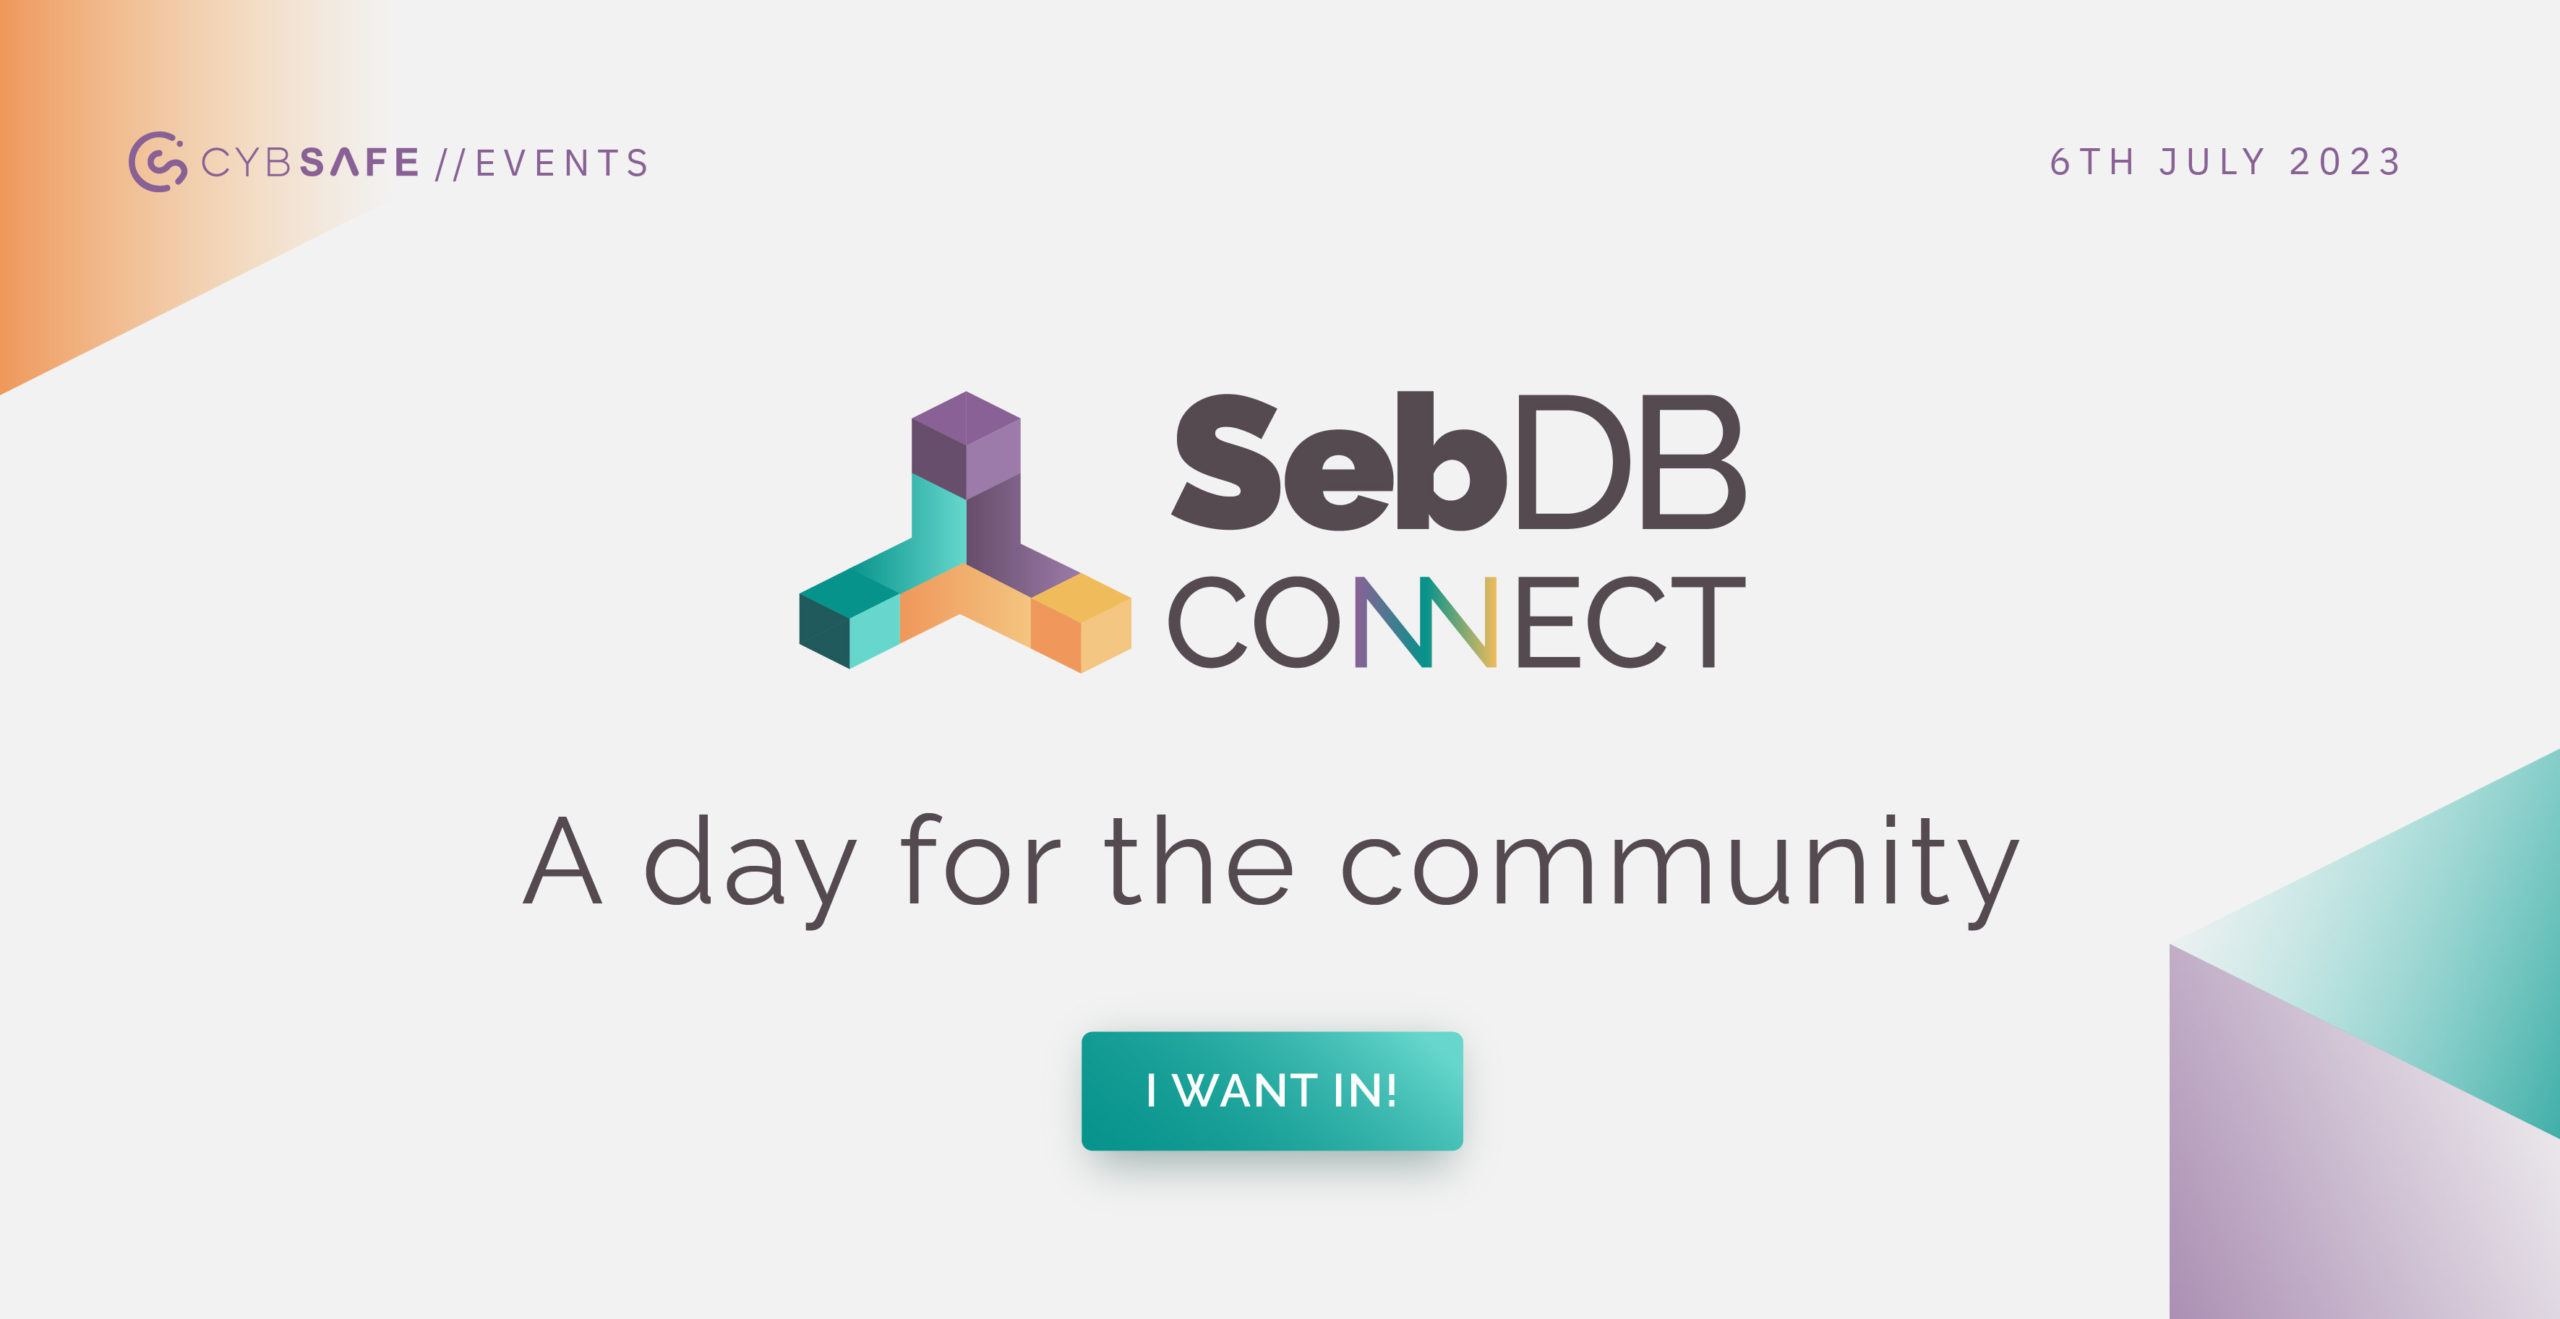 SebDB Connect, a day for the community event